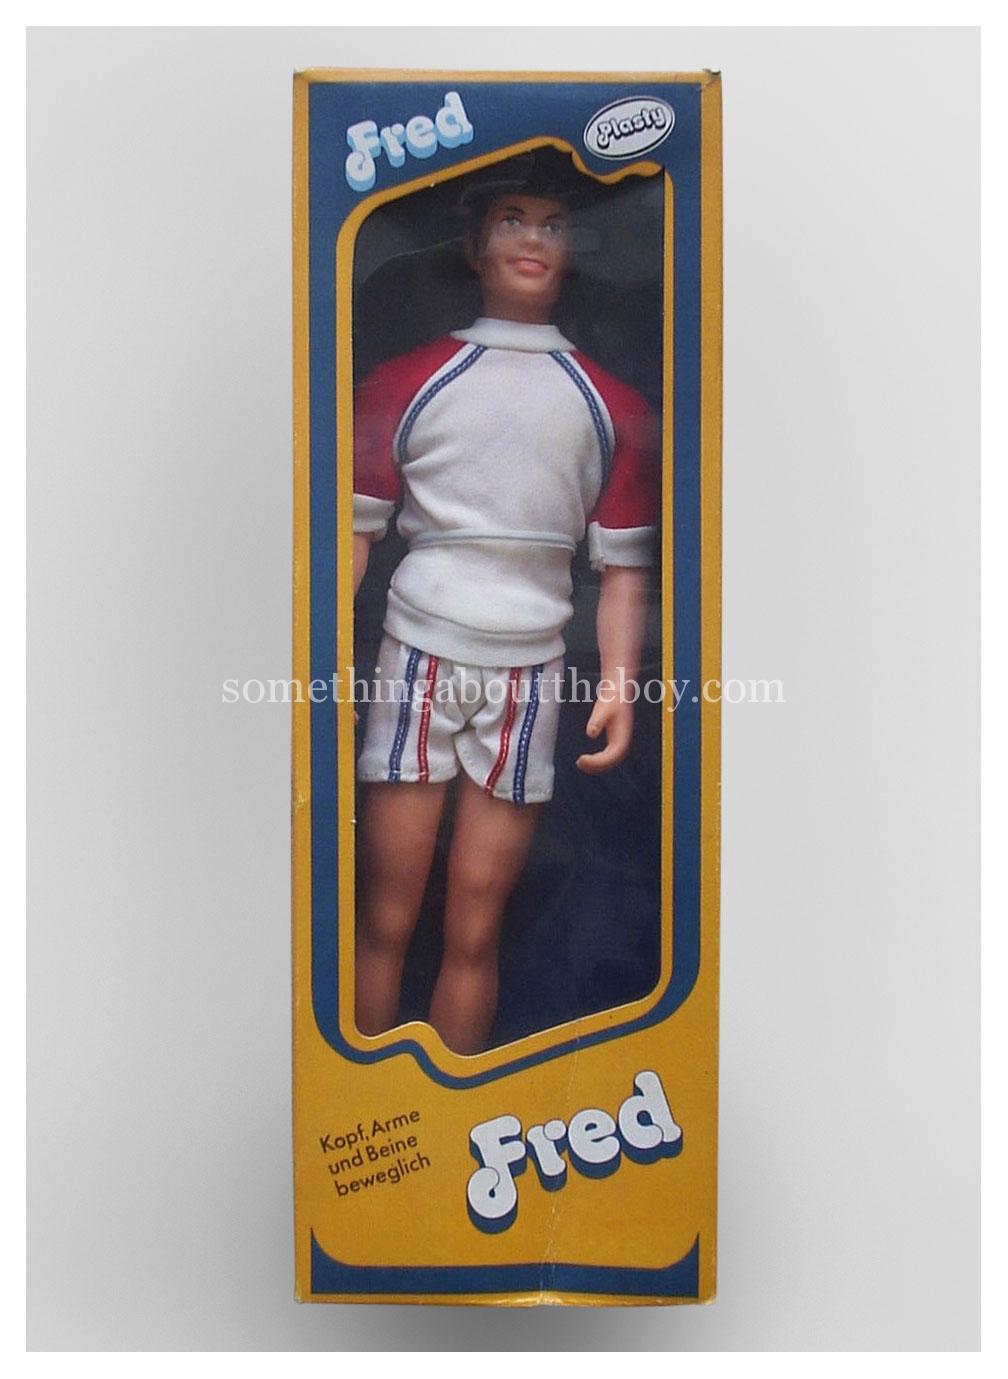 c.1984 Fred by Plasty in original packaging